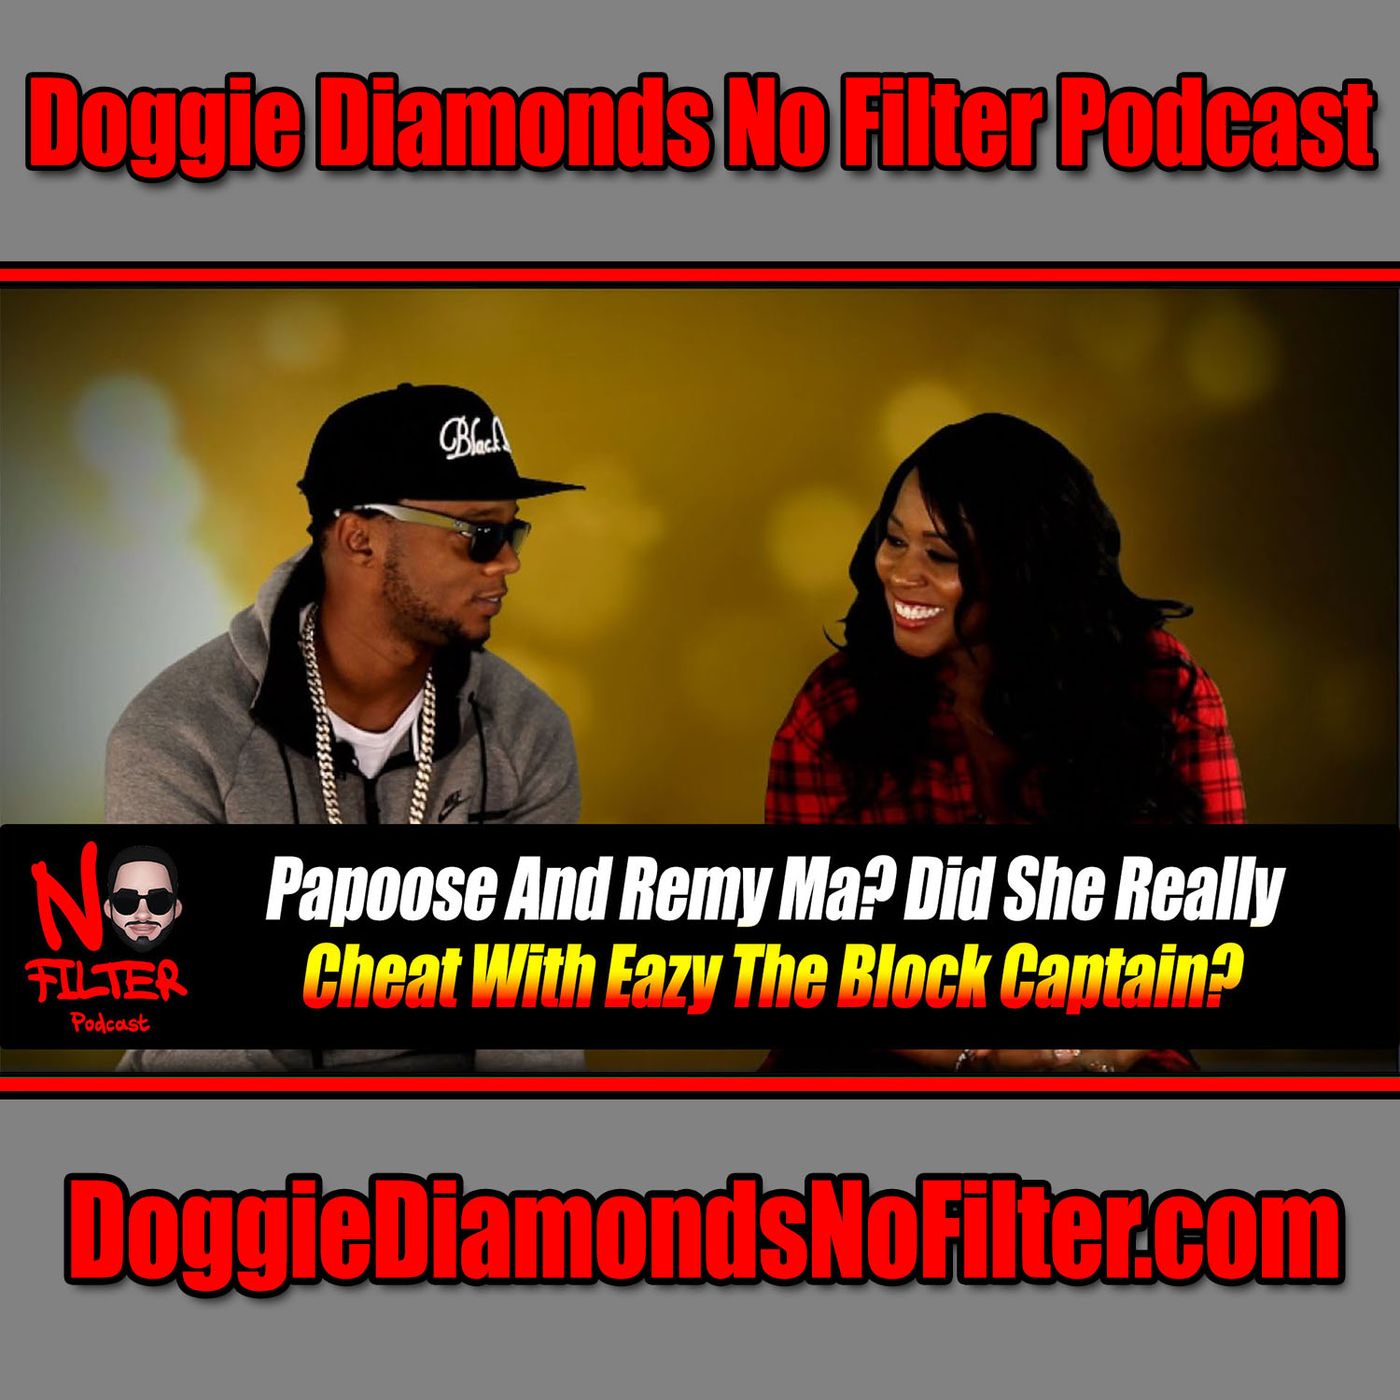 Papoose And Remy Ma? Did Remy Really Cheat With Eazy The Block Captain?